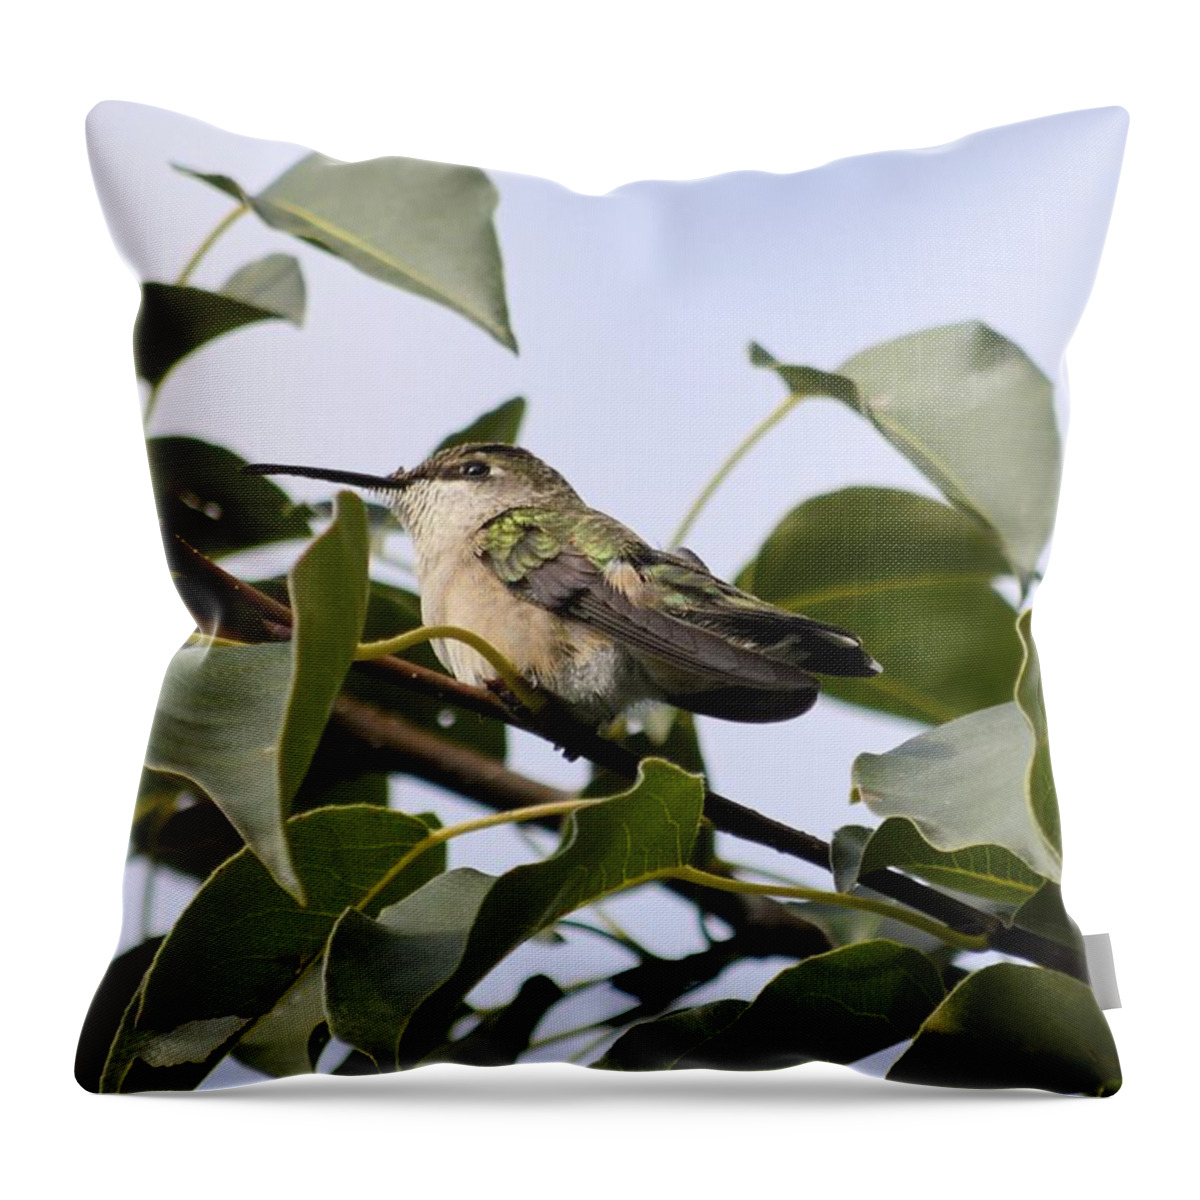 Hummingbird Throw Pillow featuring the photograph Blending In by Bonfire Photography